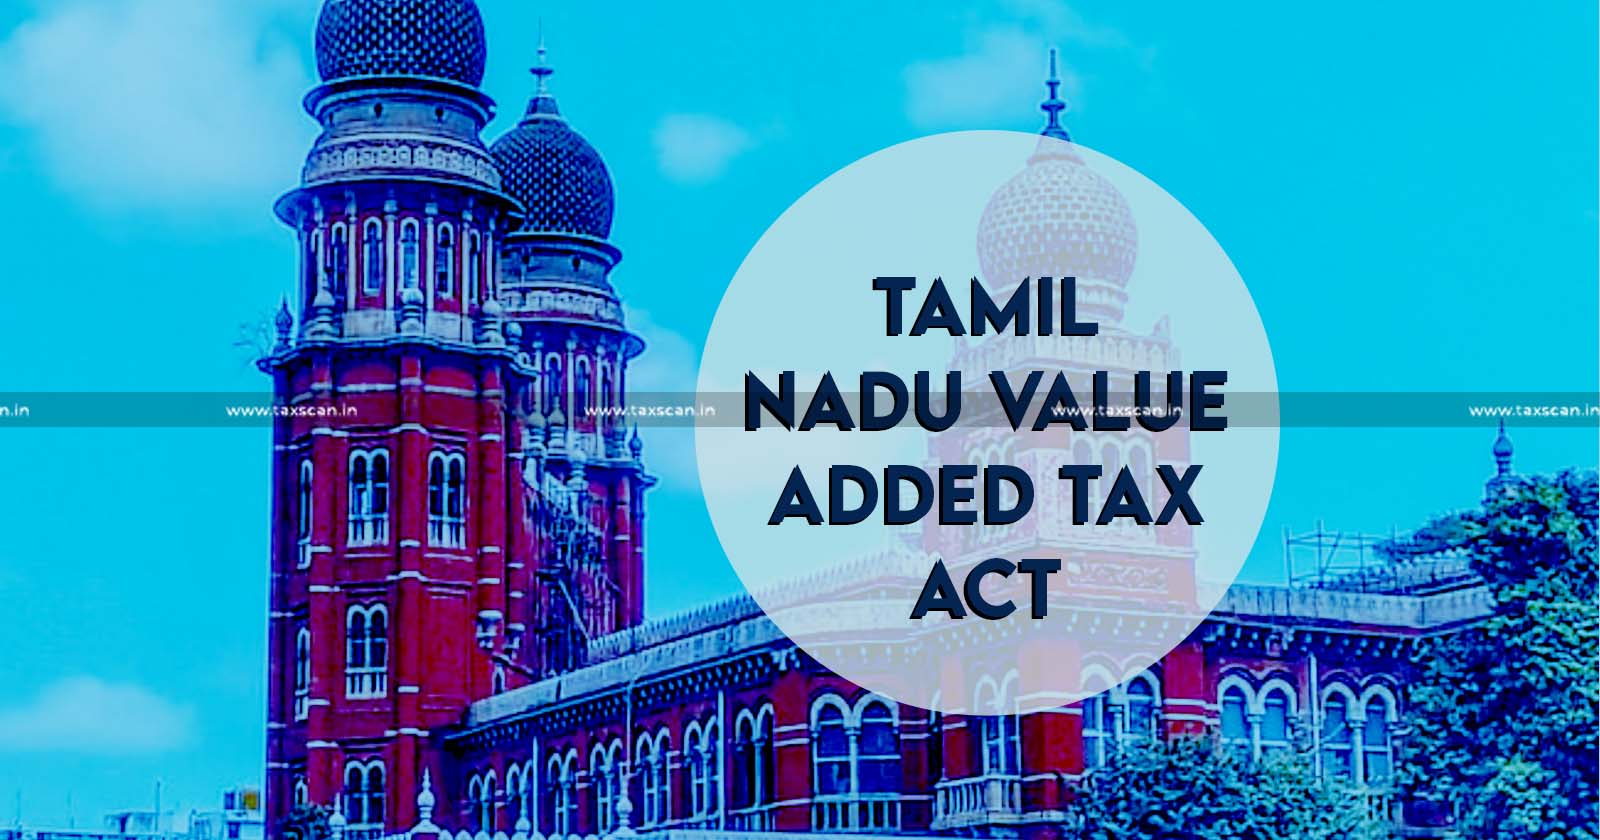 Additional Rectification Petition - Rectification Petition - Tamil Nadu Value Added Tax Act - Madras High Court Quashes Notice Issued to Discharge Tax Liability - Madras High Court - Taxscan